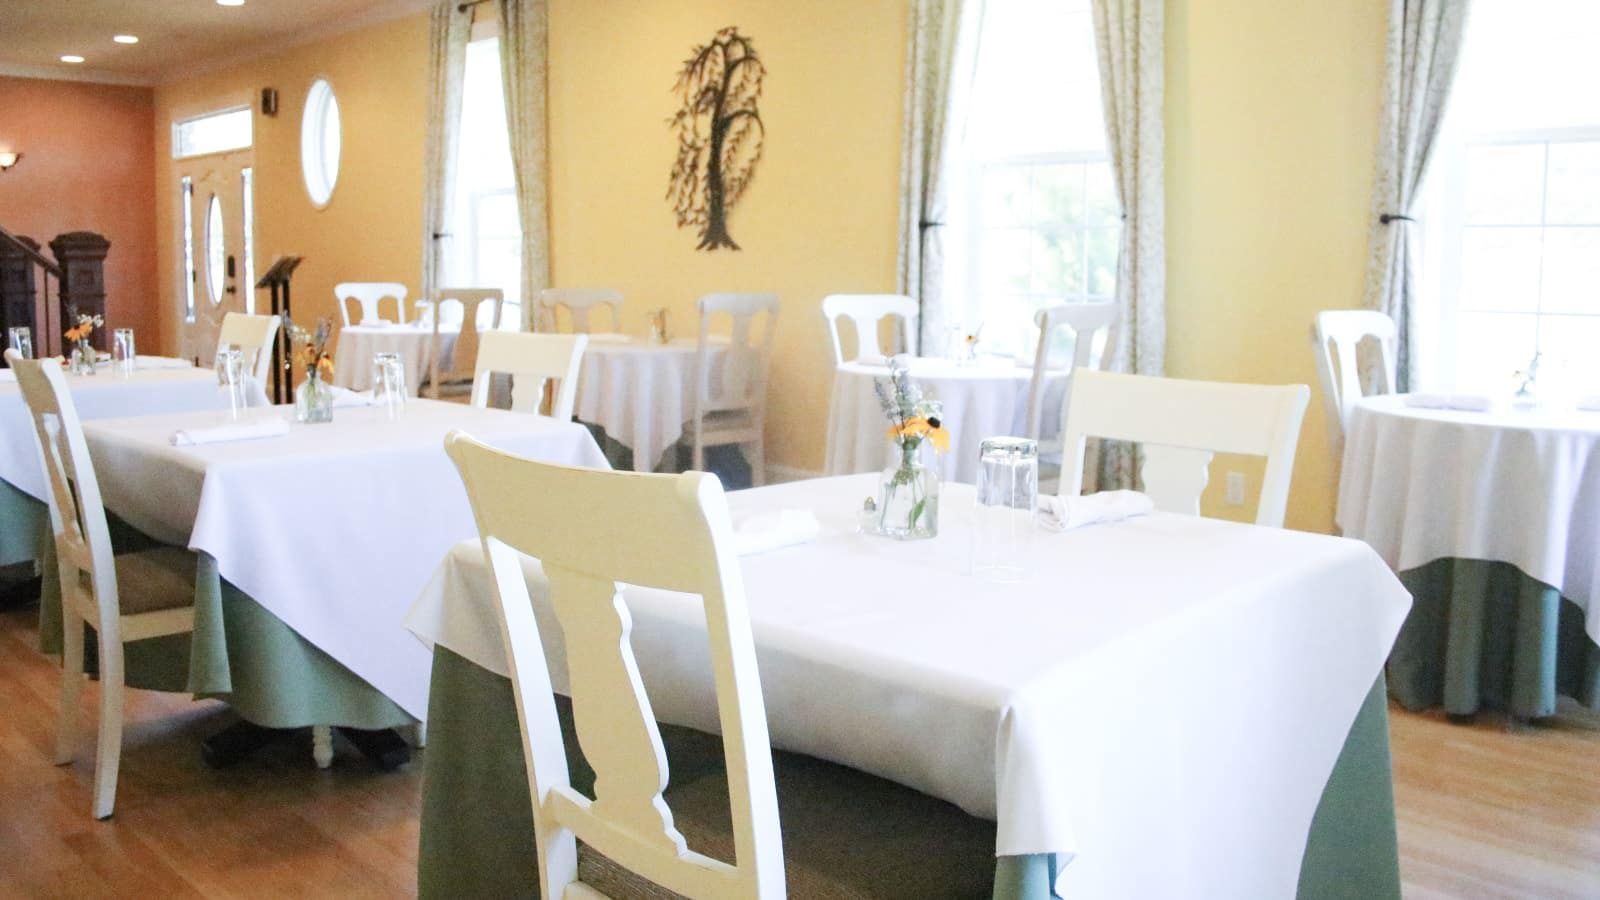 Large dining room with yellow walls, hardwood flooring, and multiple tables with white and green tablecloths and white chairs